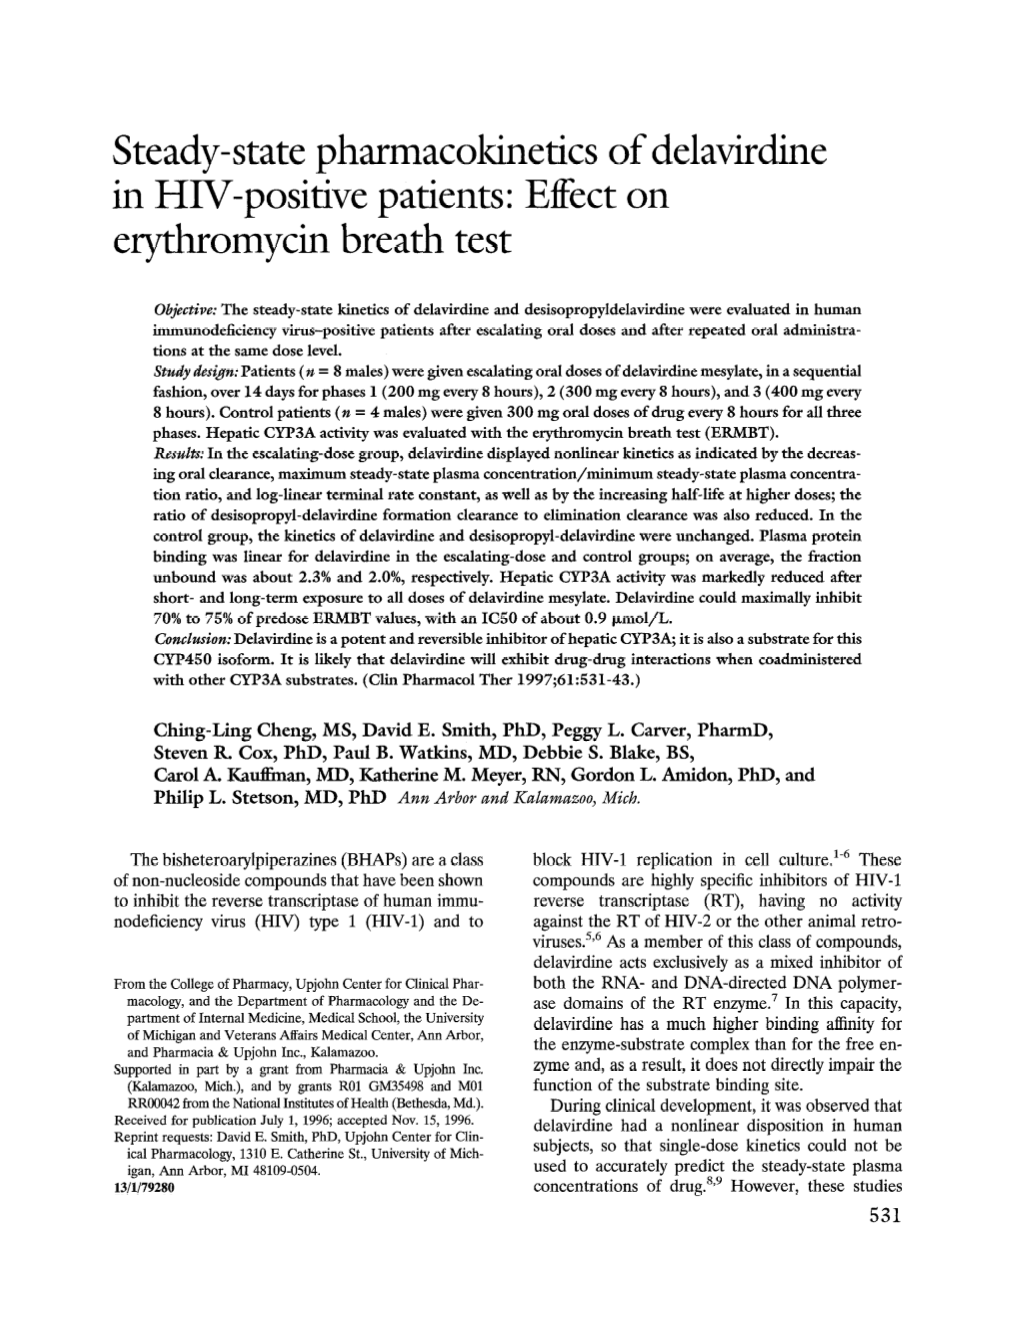 Steady-State Pharmacokinetics of Delavirdine in HIV-Positive Patients: Effect on Erythromycin Breath Test